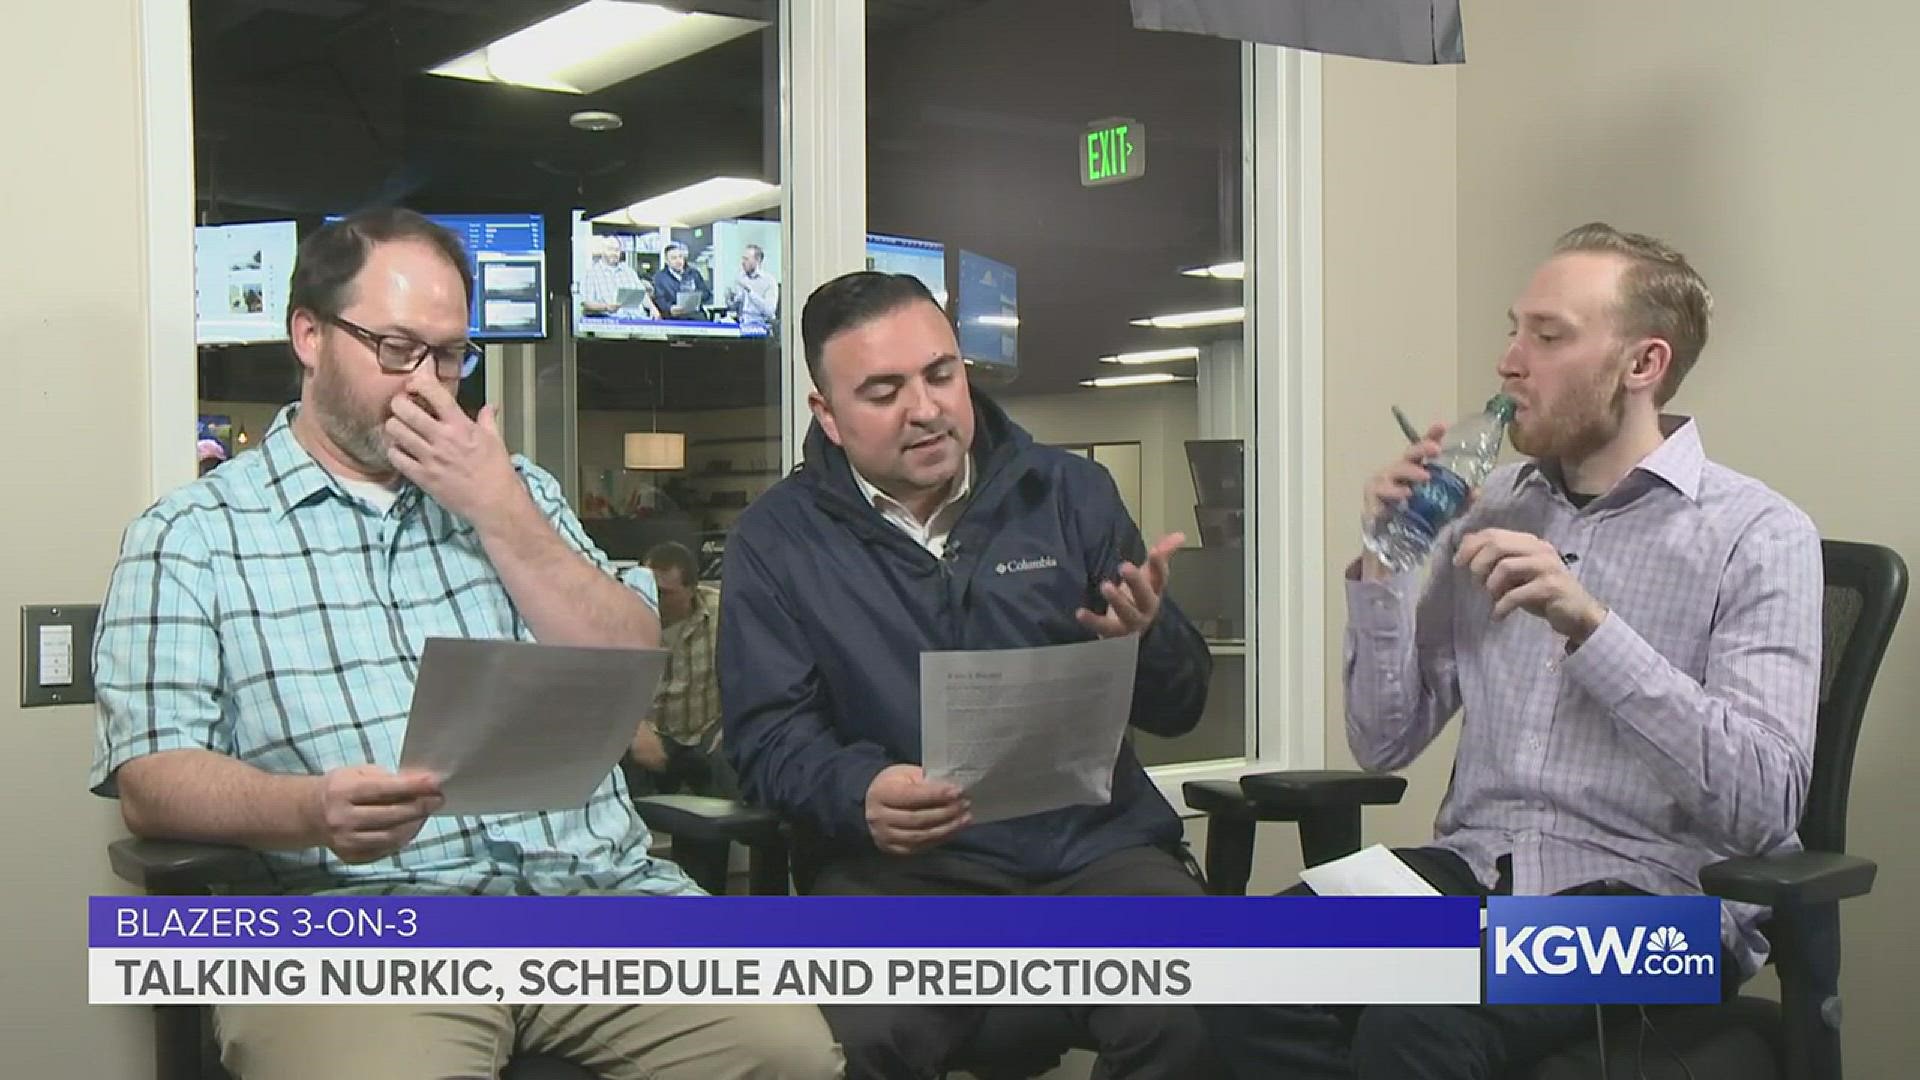 KGW's Jared Cowley, Orlando Sanchez and Nate Hanson talk about whether Blazers center Jusuf Nurkic is a good long-term fit in Portland.